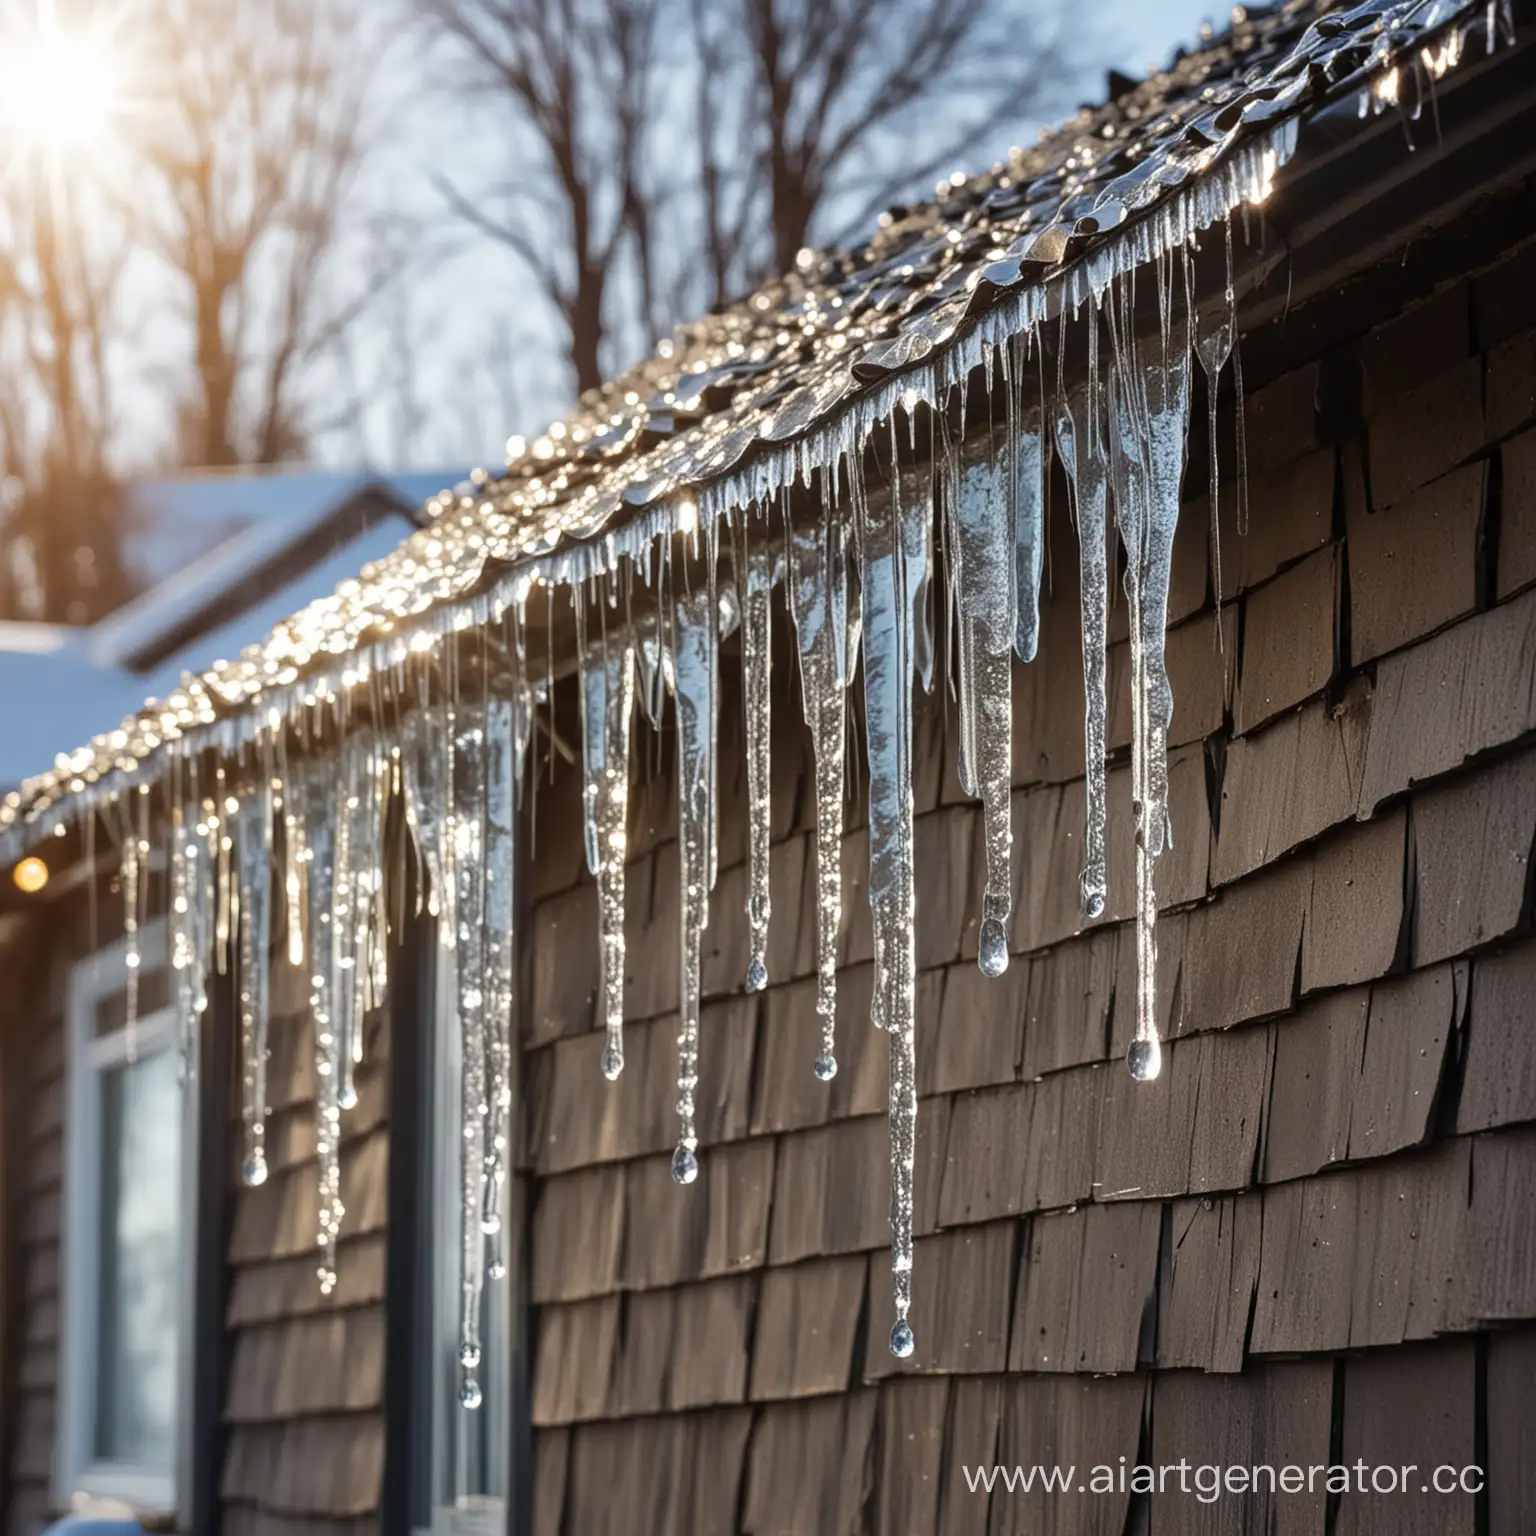 Melting-Metal-Shingles-Spring-Sunlight-on-Building-Roof-with-Icicles